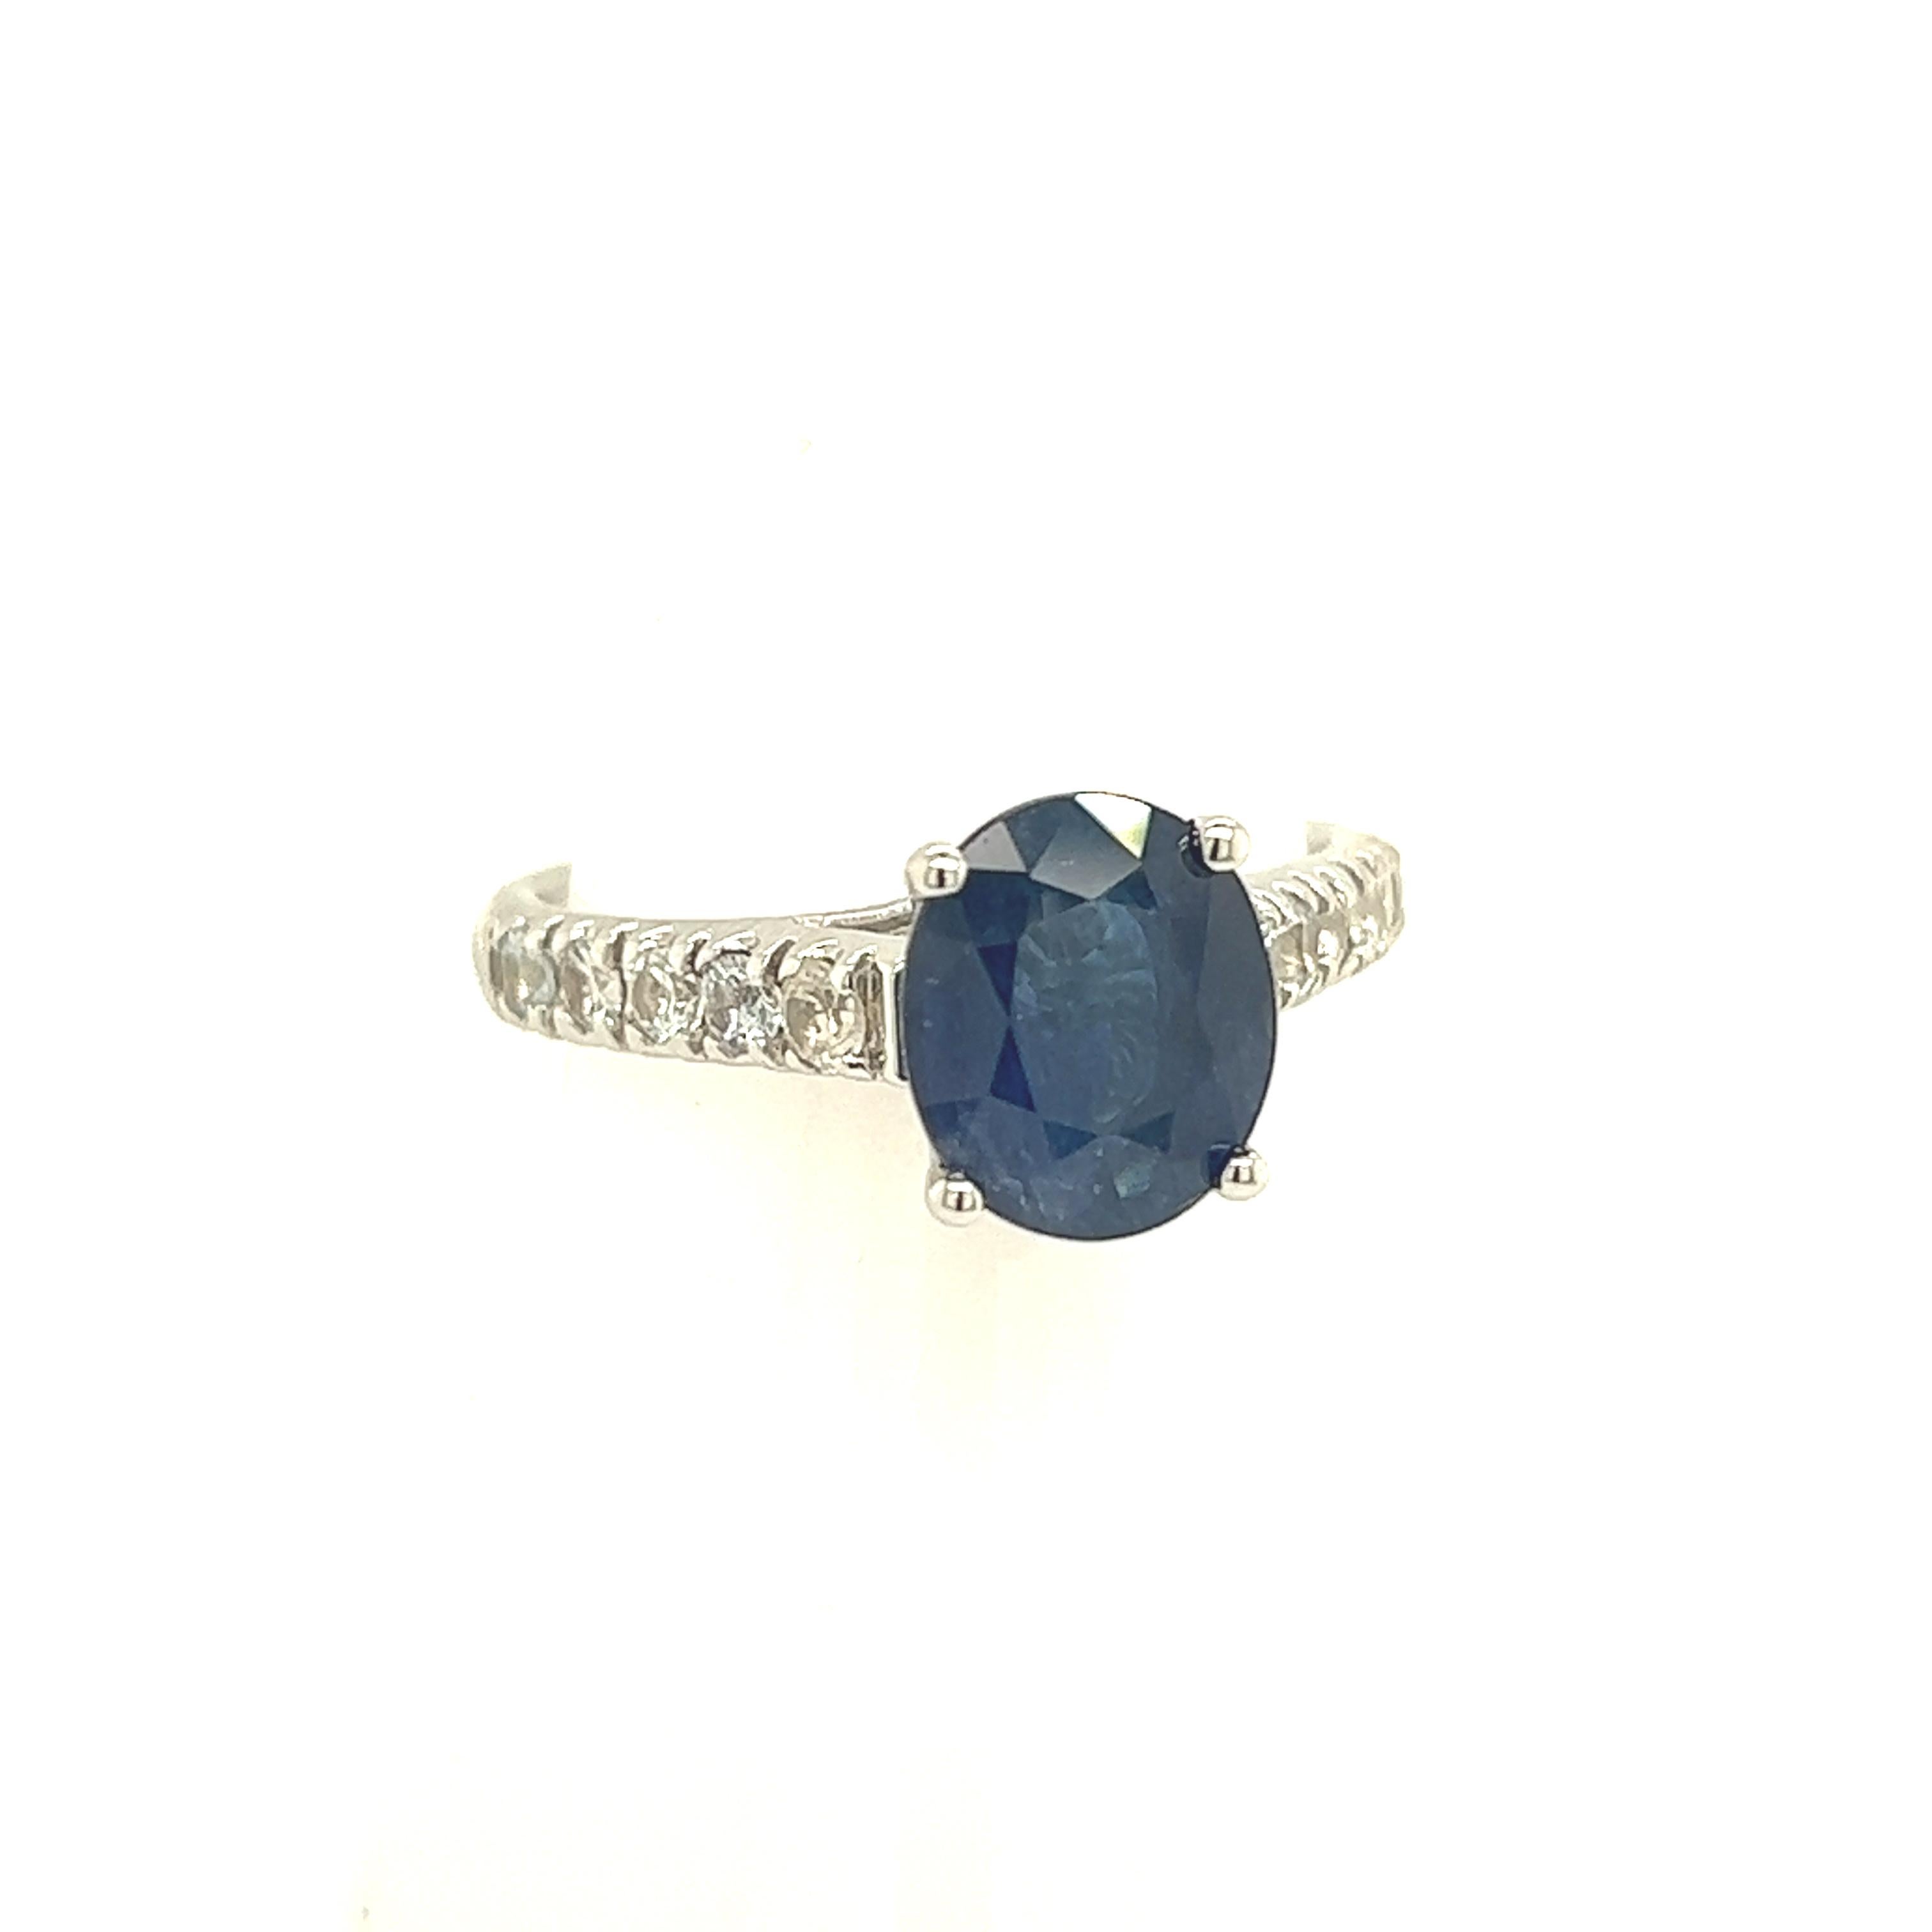 Mixed Cut Natural Sapphire Diamond Ring 14k W Gold 3 TCW Certified For Sale